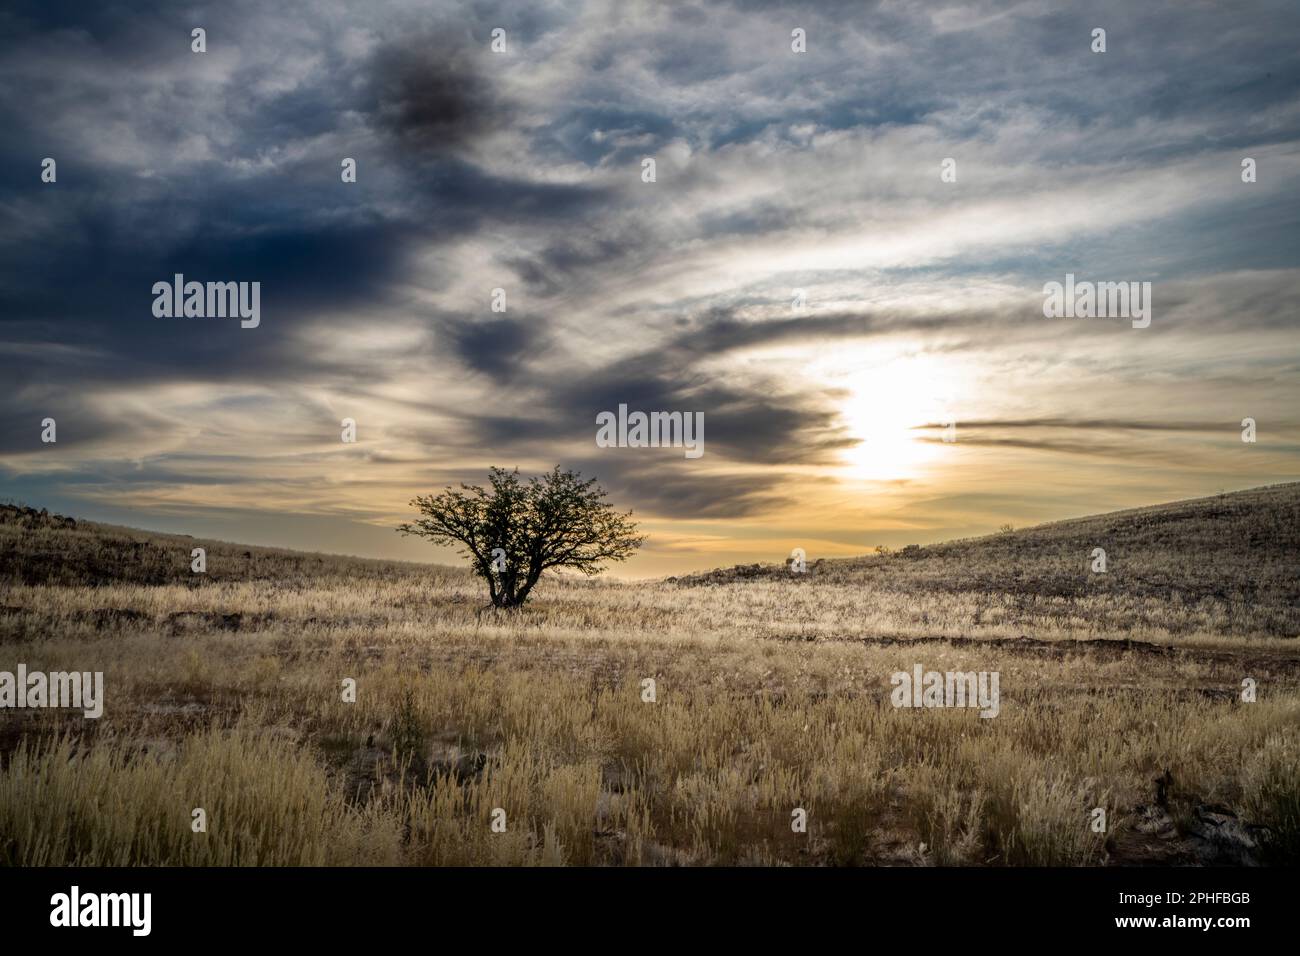 Single tree standing in a beautiful desert landscape with cloudy contrasty evening sun sky. Damaraland, Namibia, Africa Stock Photo